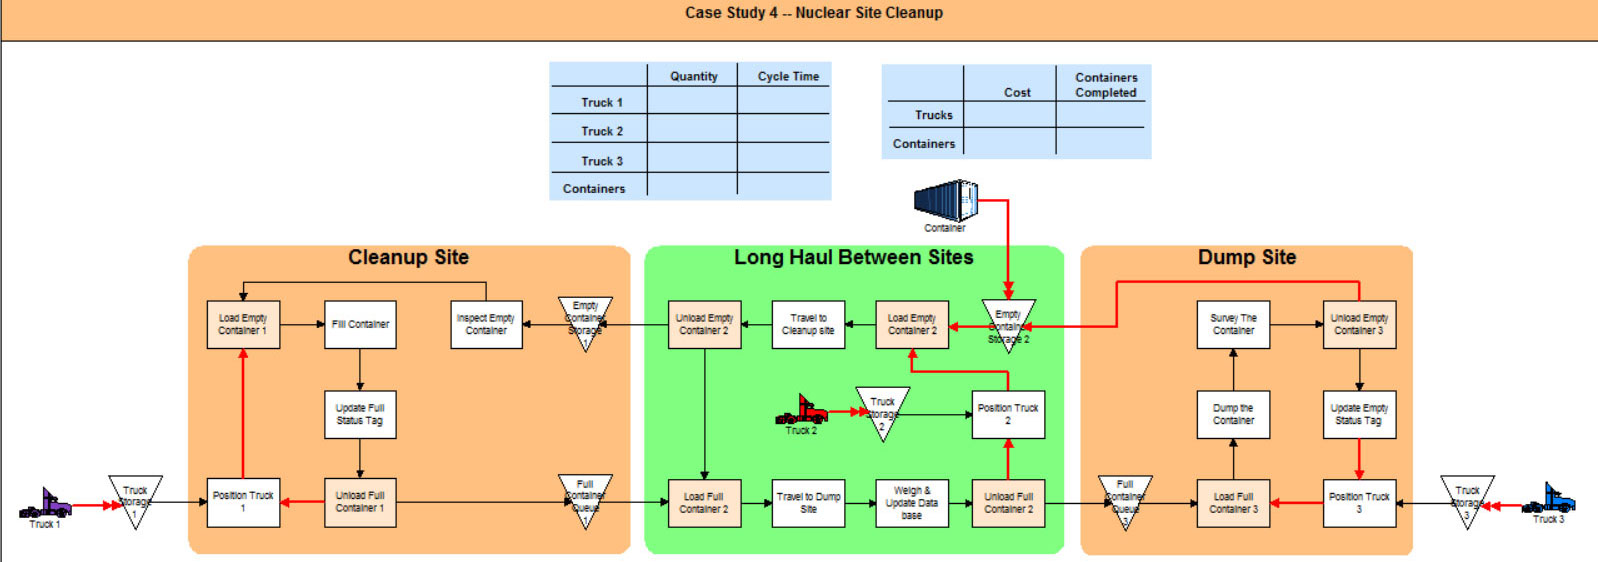 Case Study 4 Nuclear Site Cleanup Model